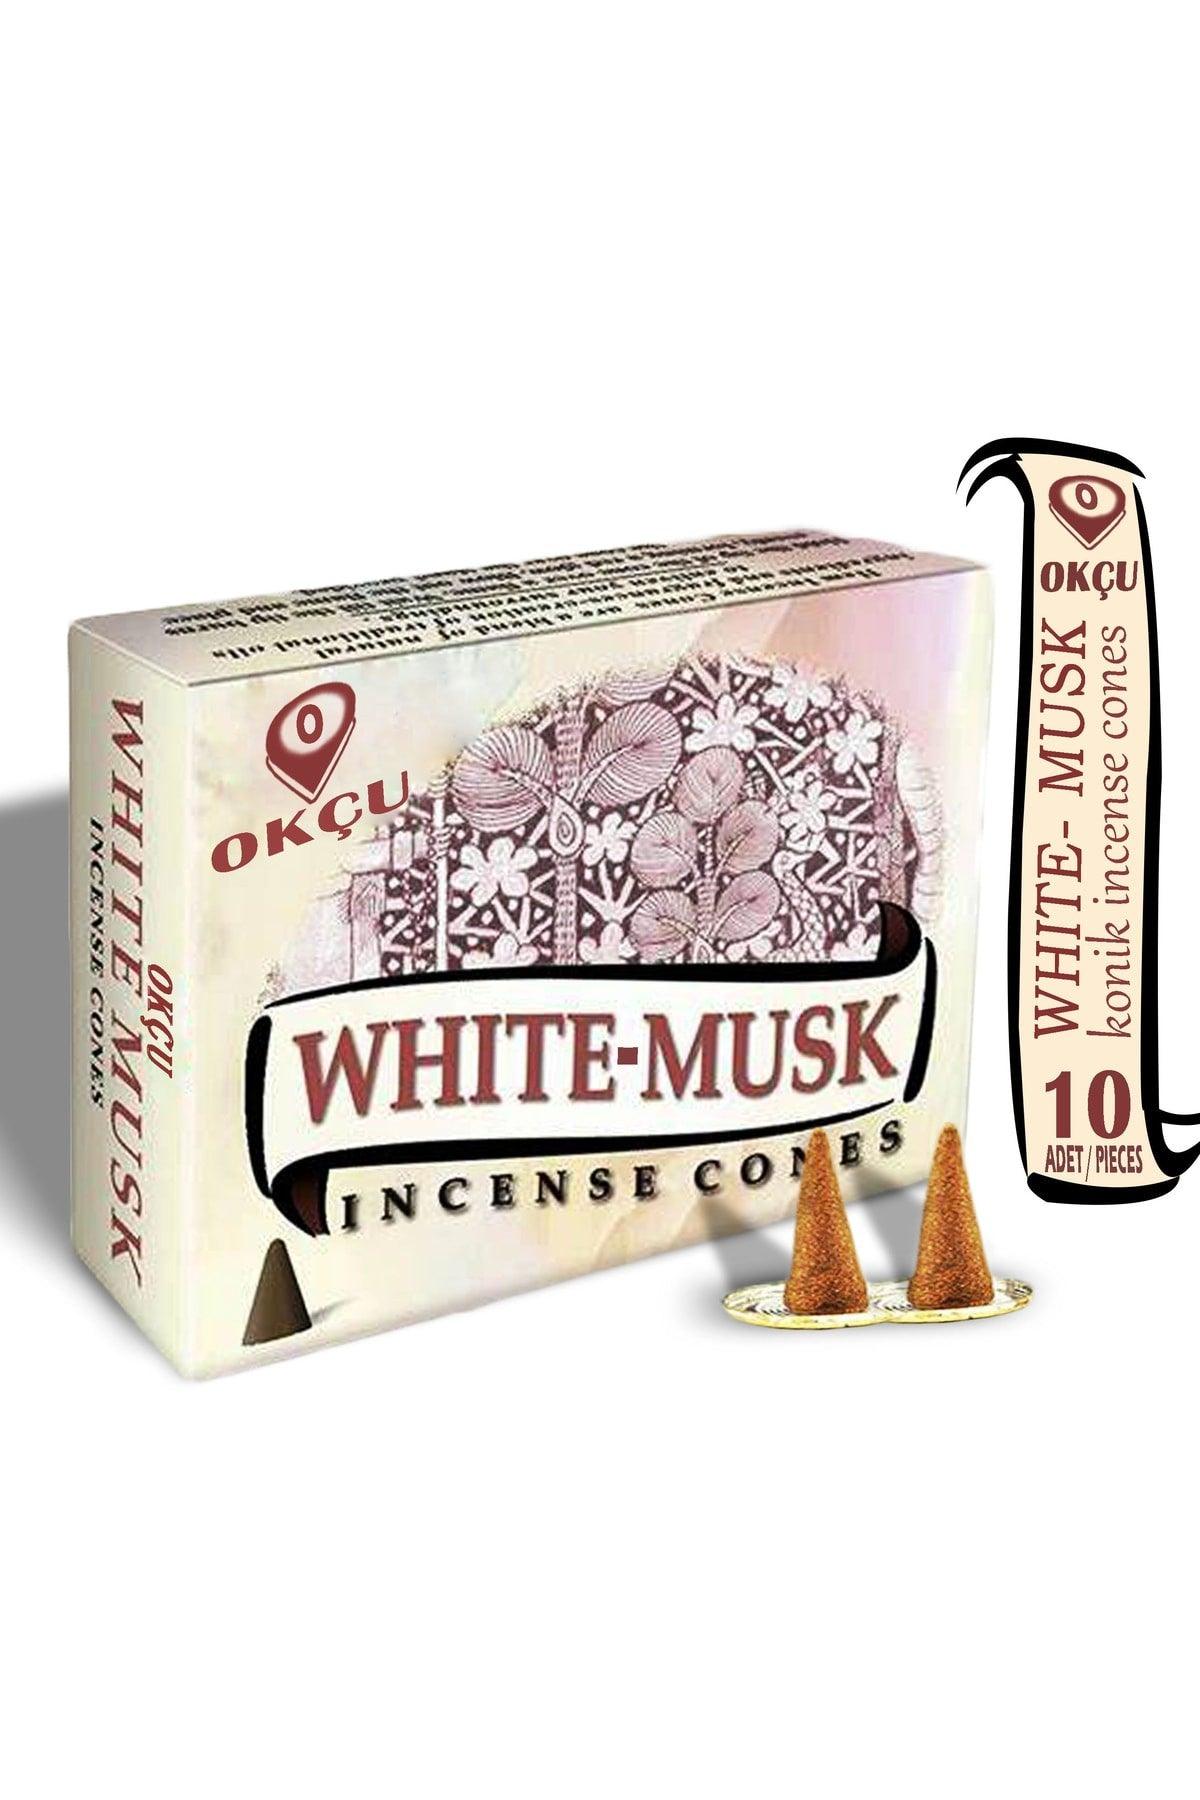 White Musk Conical Incense 10 Pcs Not Backflow - Swordslife